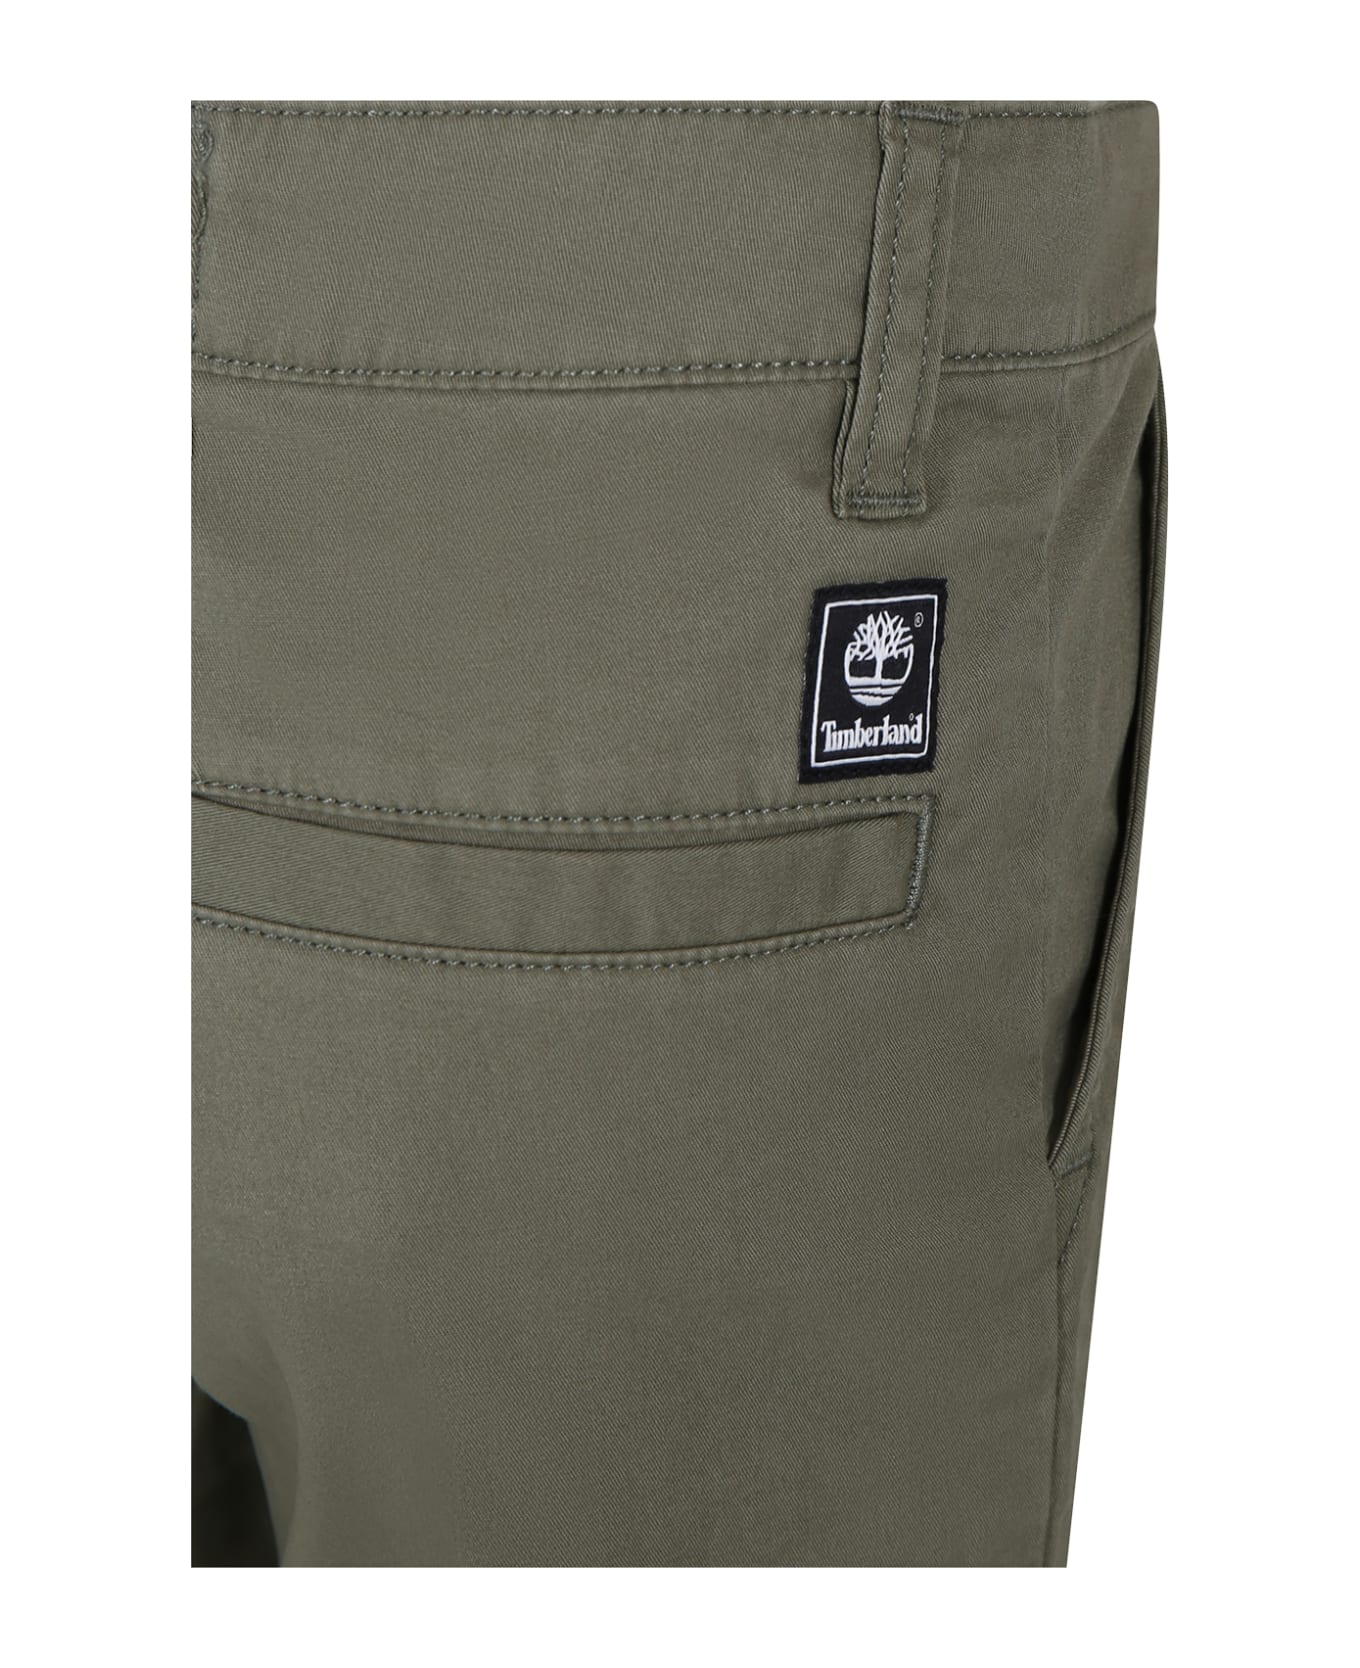 Timberland Green Shorts For Boy With Logo - Green ボトムス